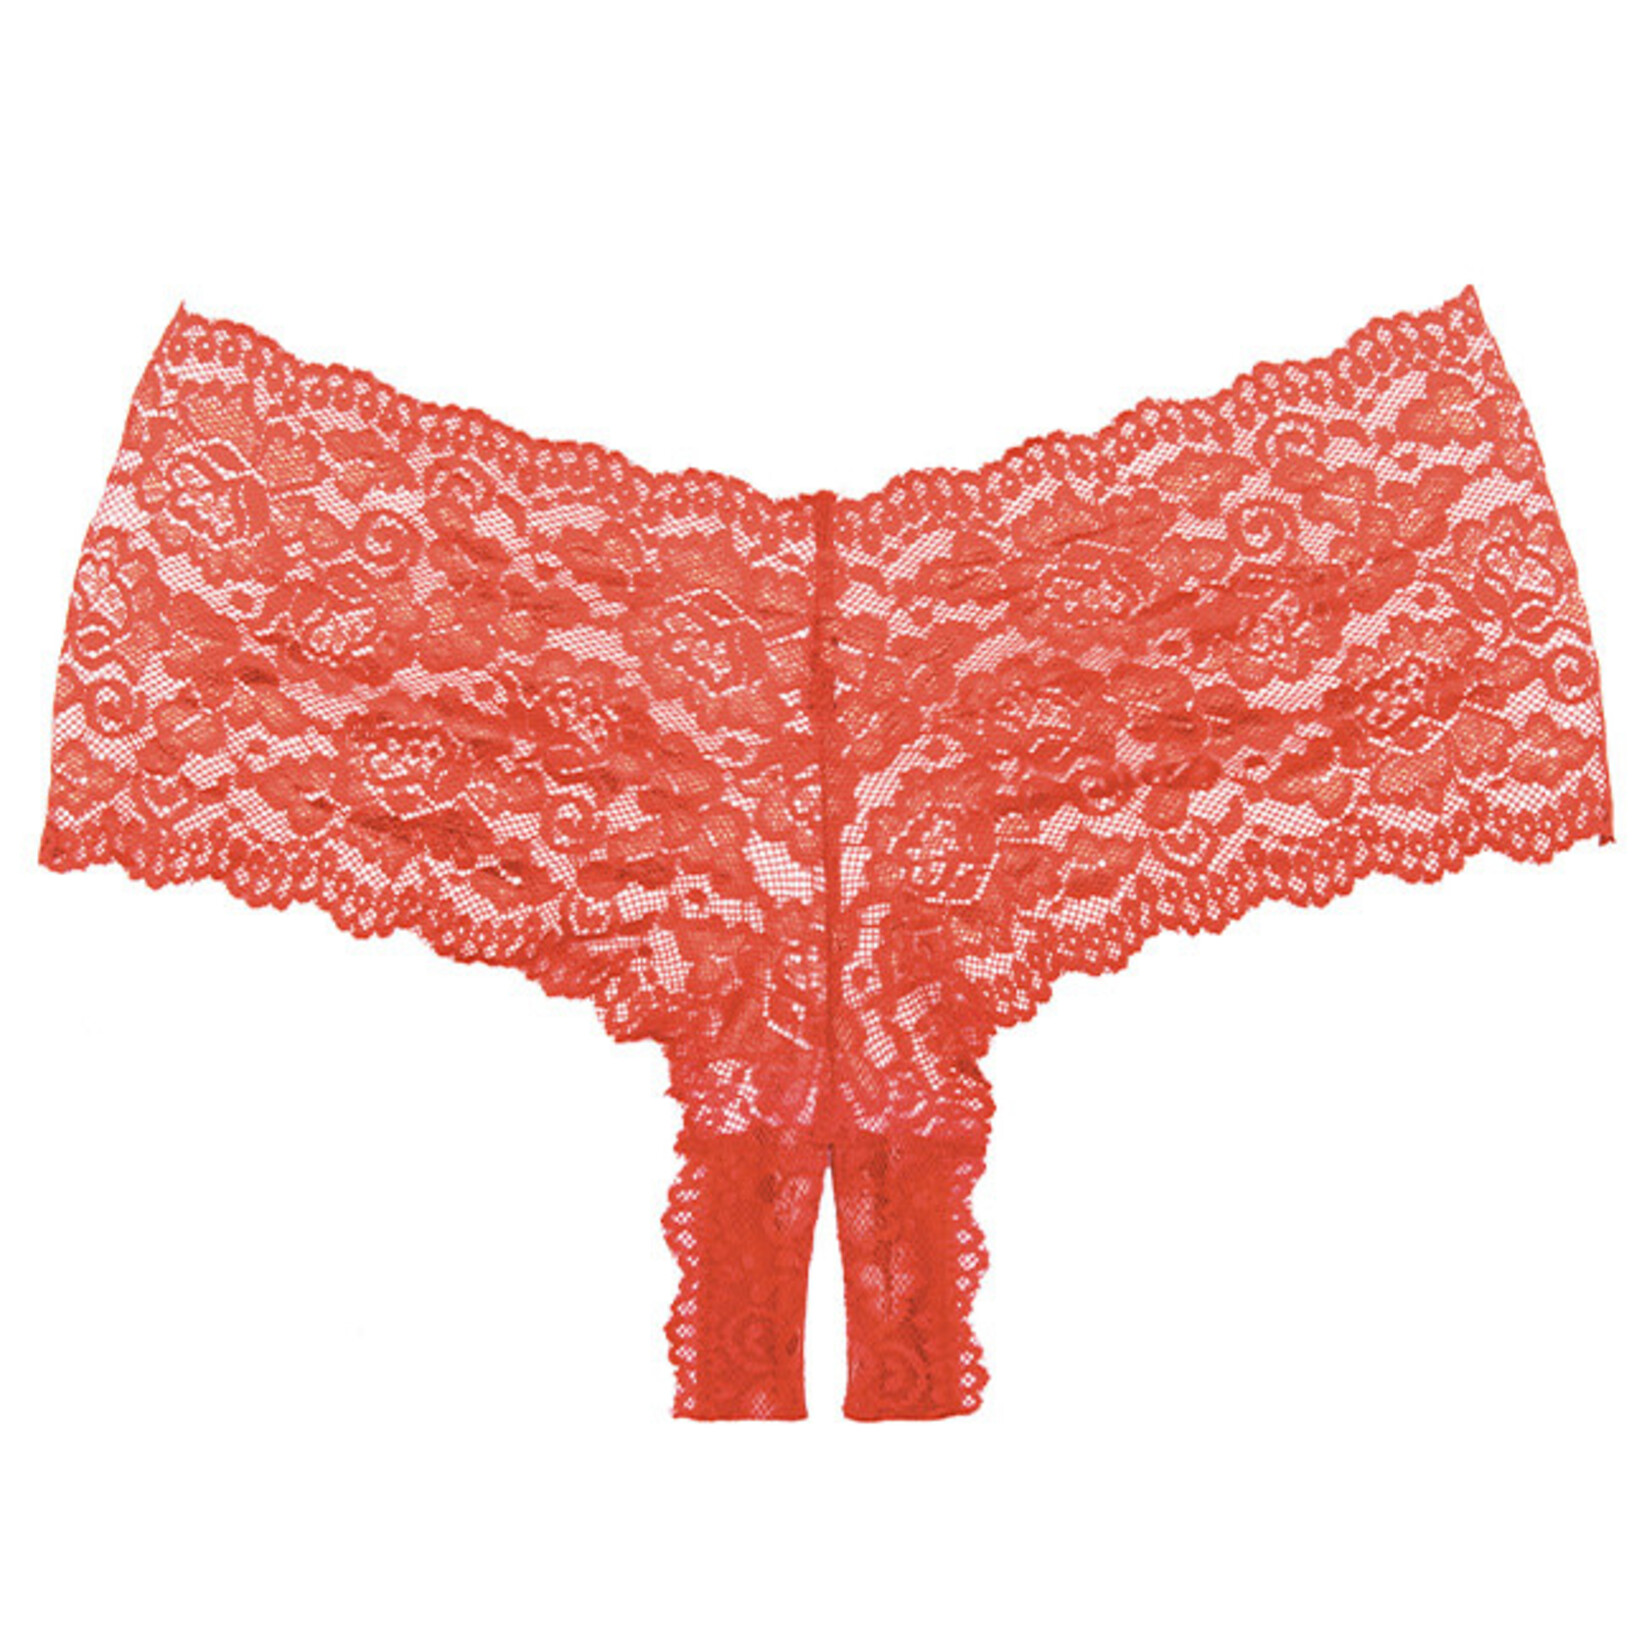 Allure Lingerie Adore by Allure Candy Apple Panty OS